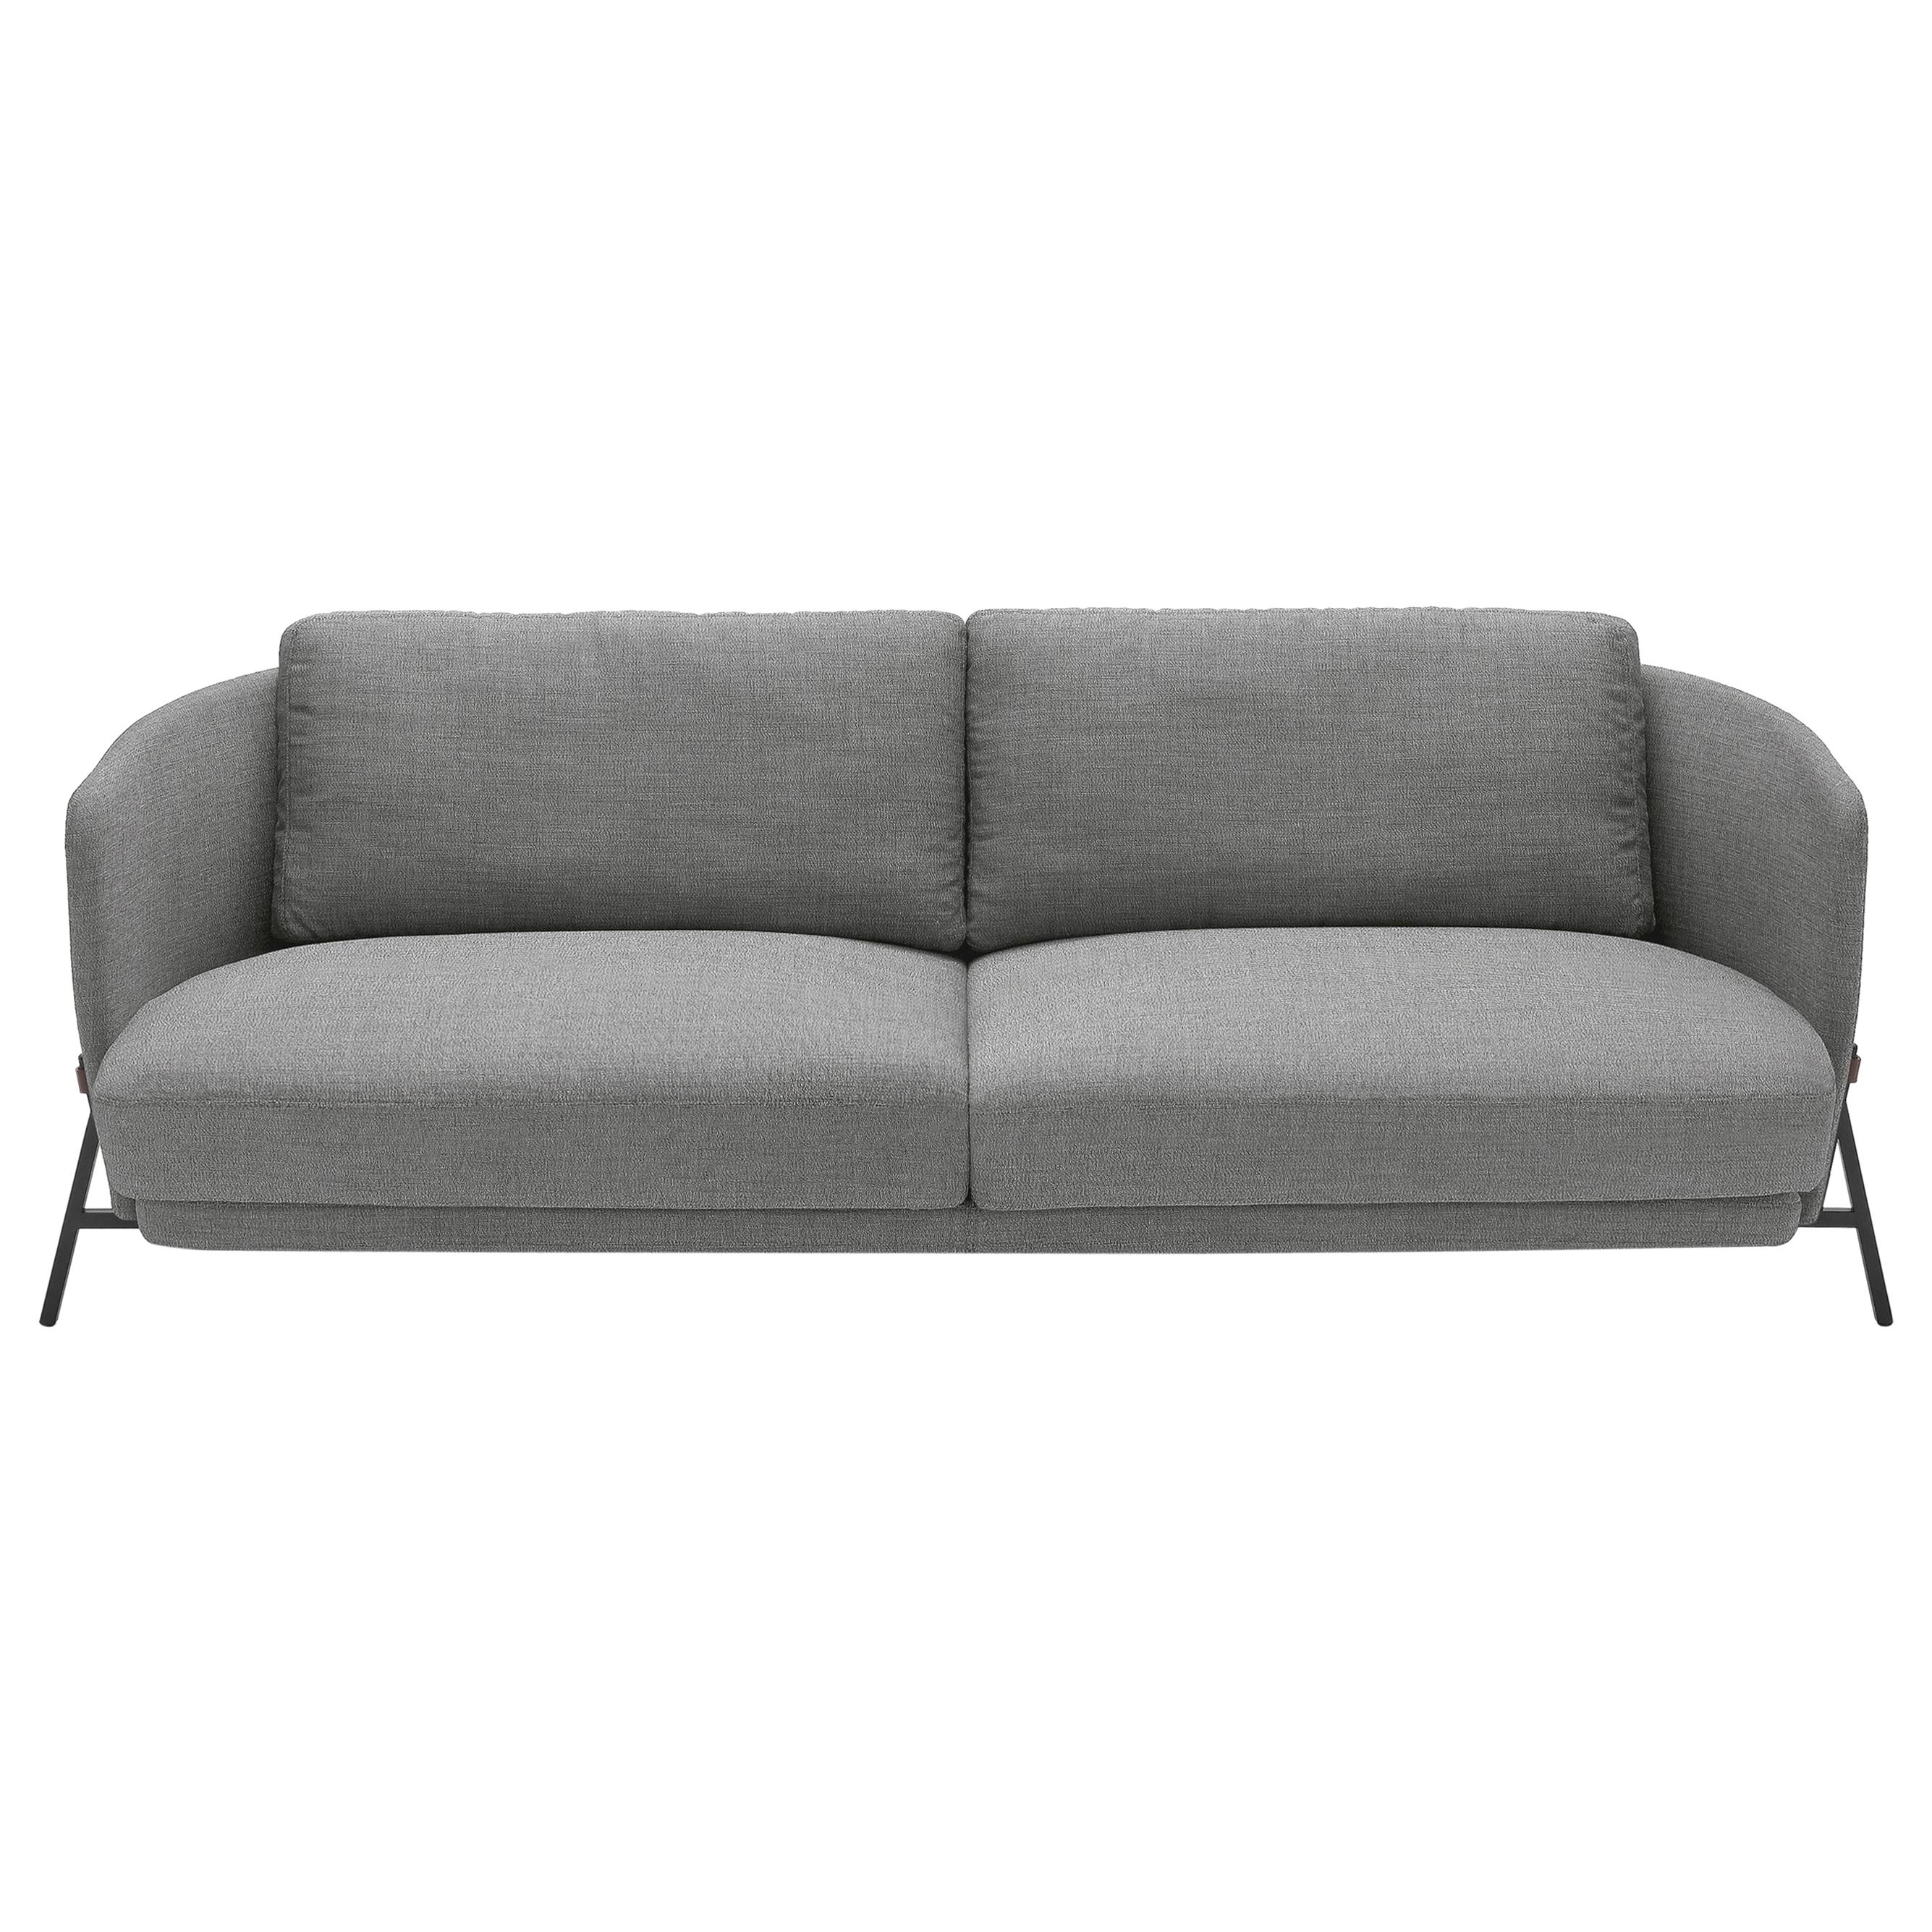 Arflex Cradle Two-Seater Sofa in Cherie Fabric with Black Legs by Neri & Hu